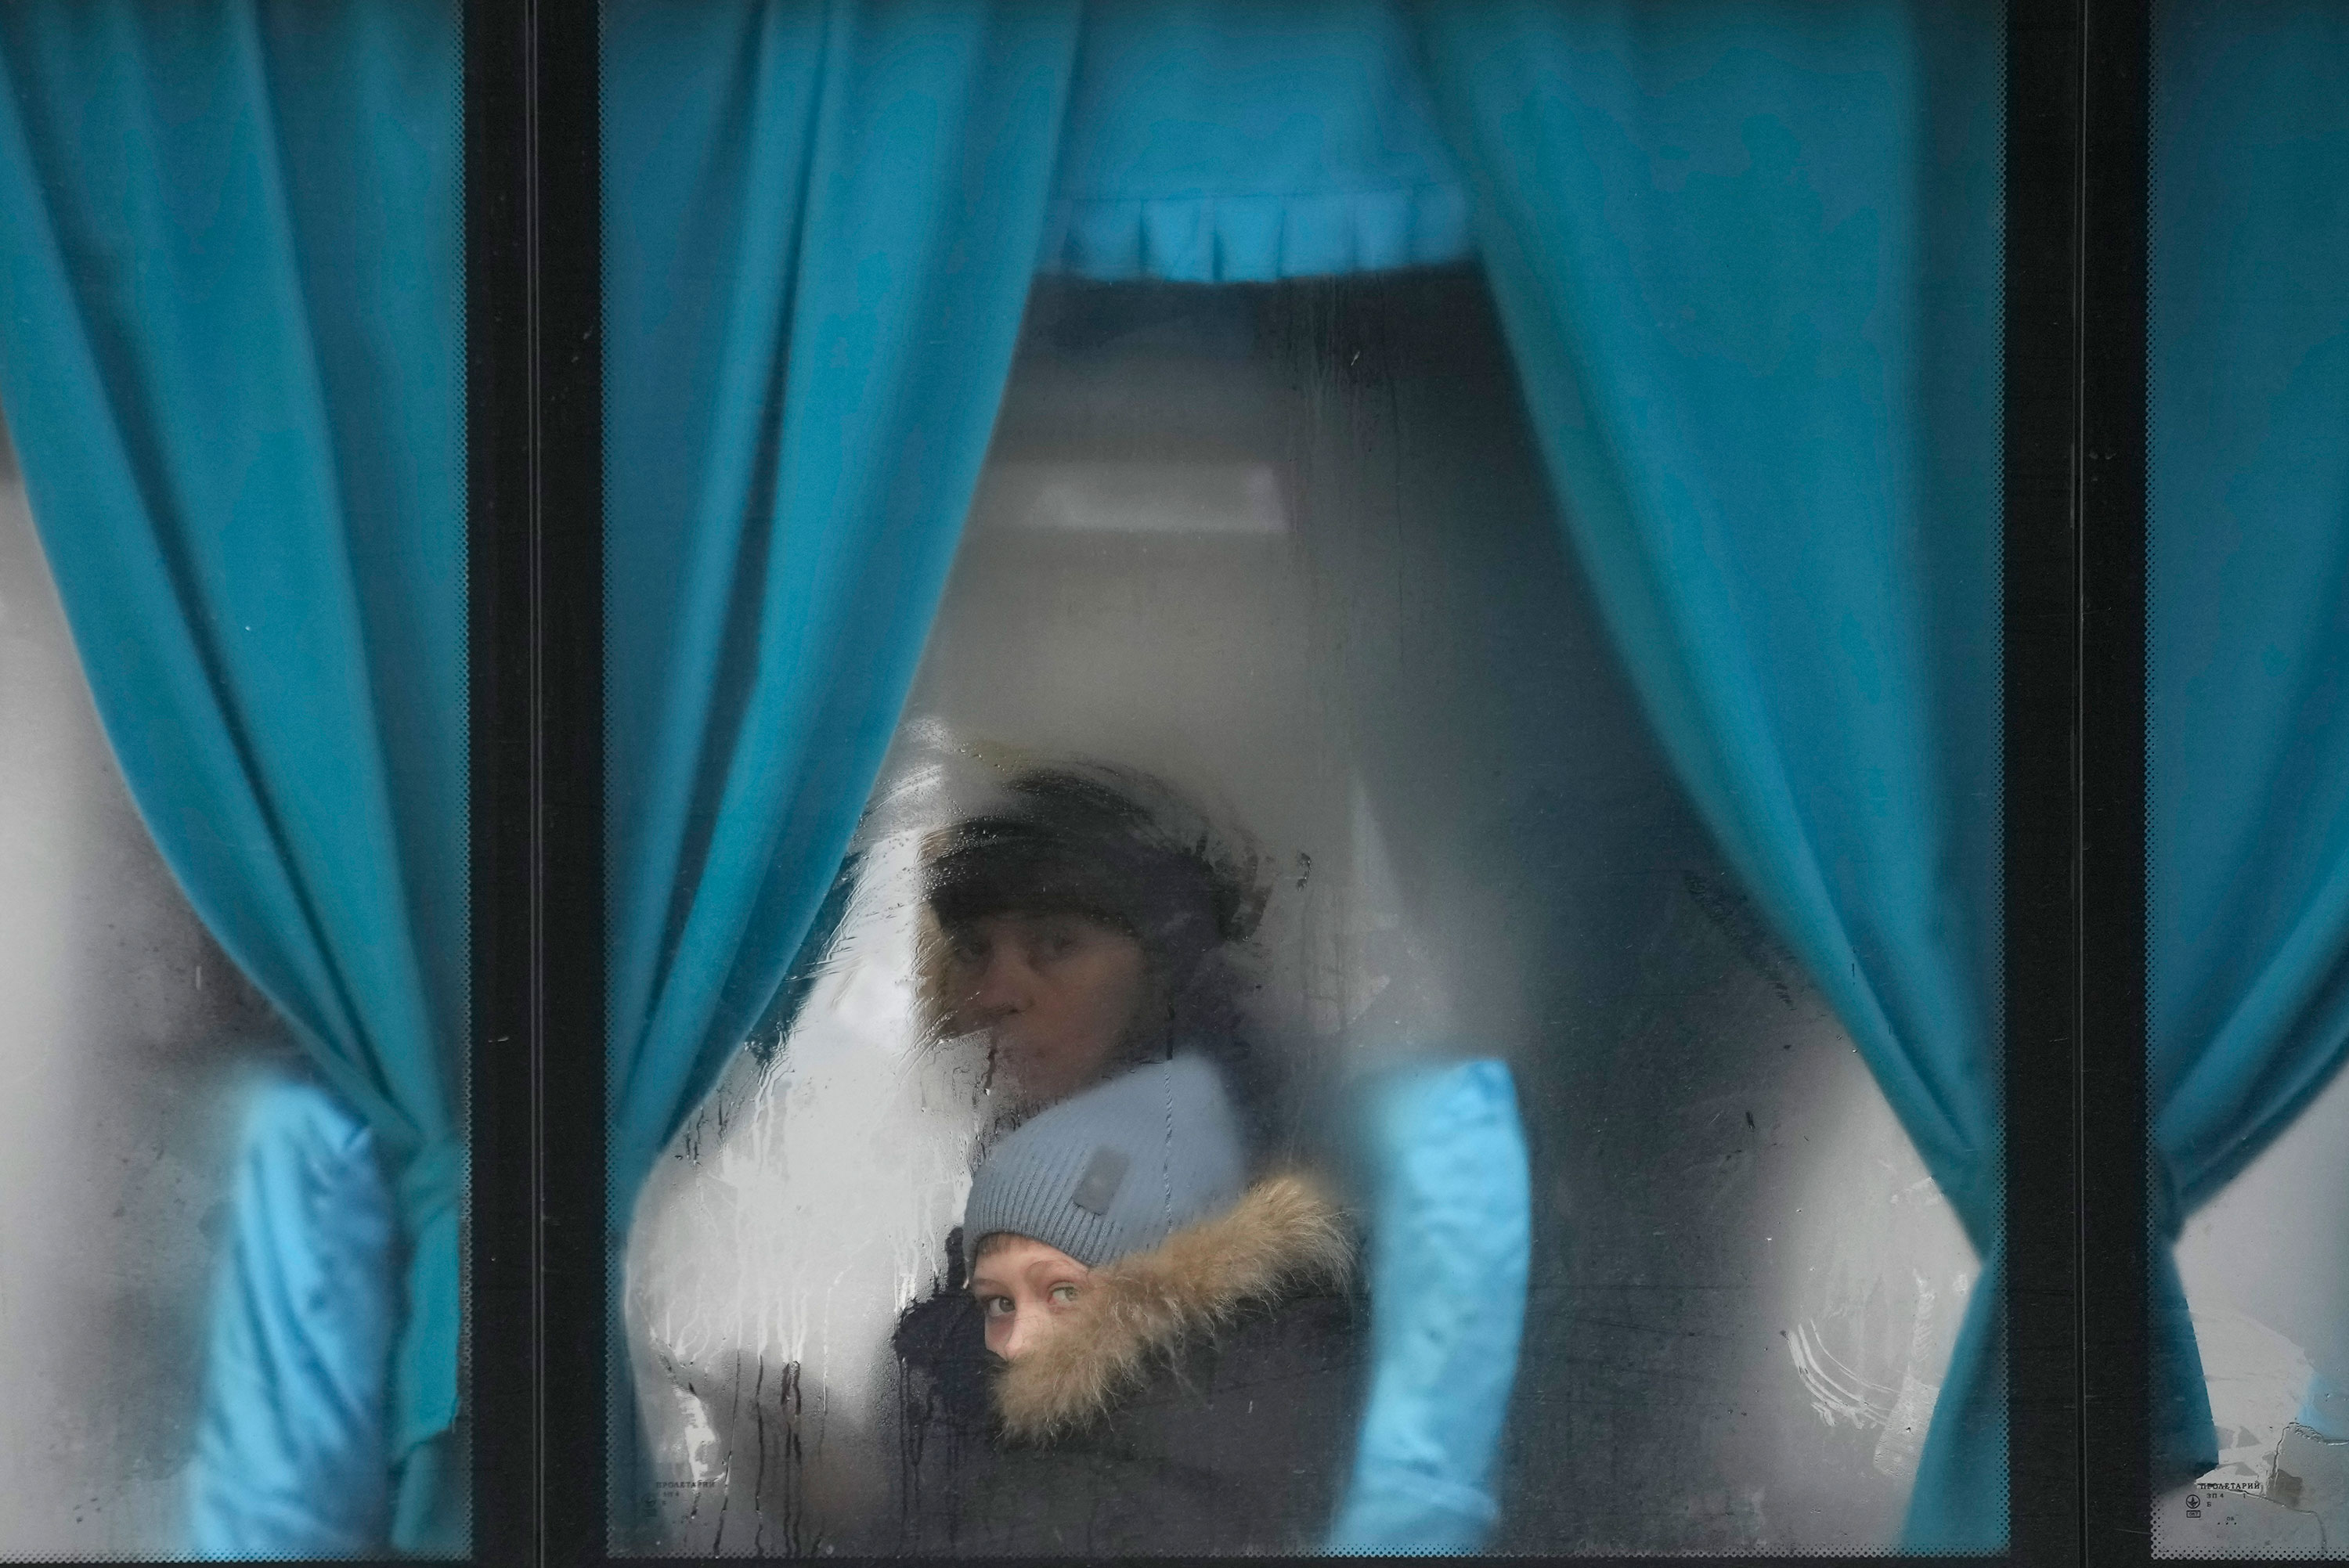 A woman and child peer out of the window of a bus as they leave Sievierodonetsk in the Luhansk region of Ukraine on Thursday, February 24.